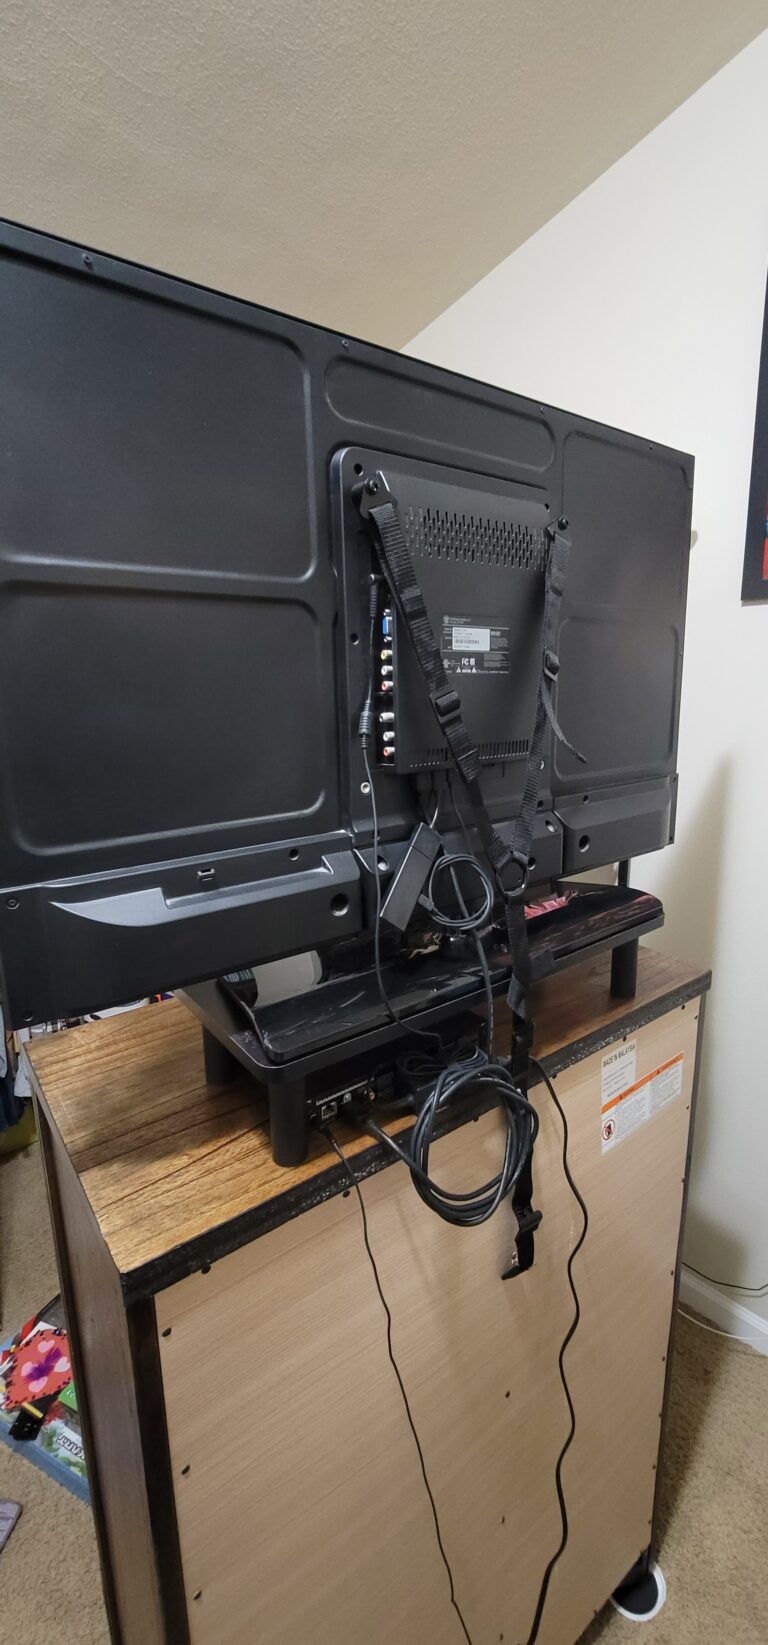 Child's TV put on a riser and safety strapped to their dresser. TV Mounting Service.